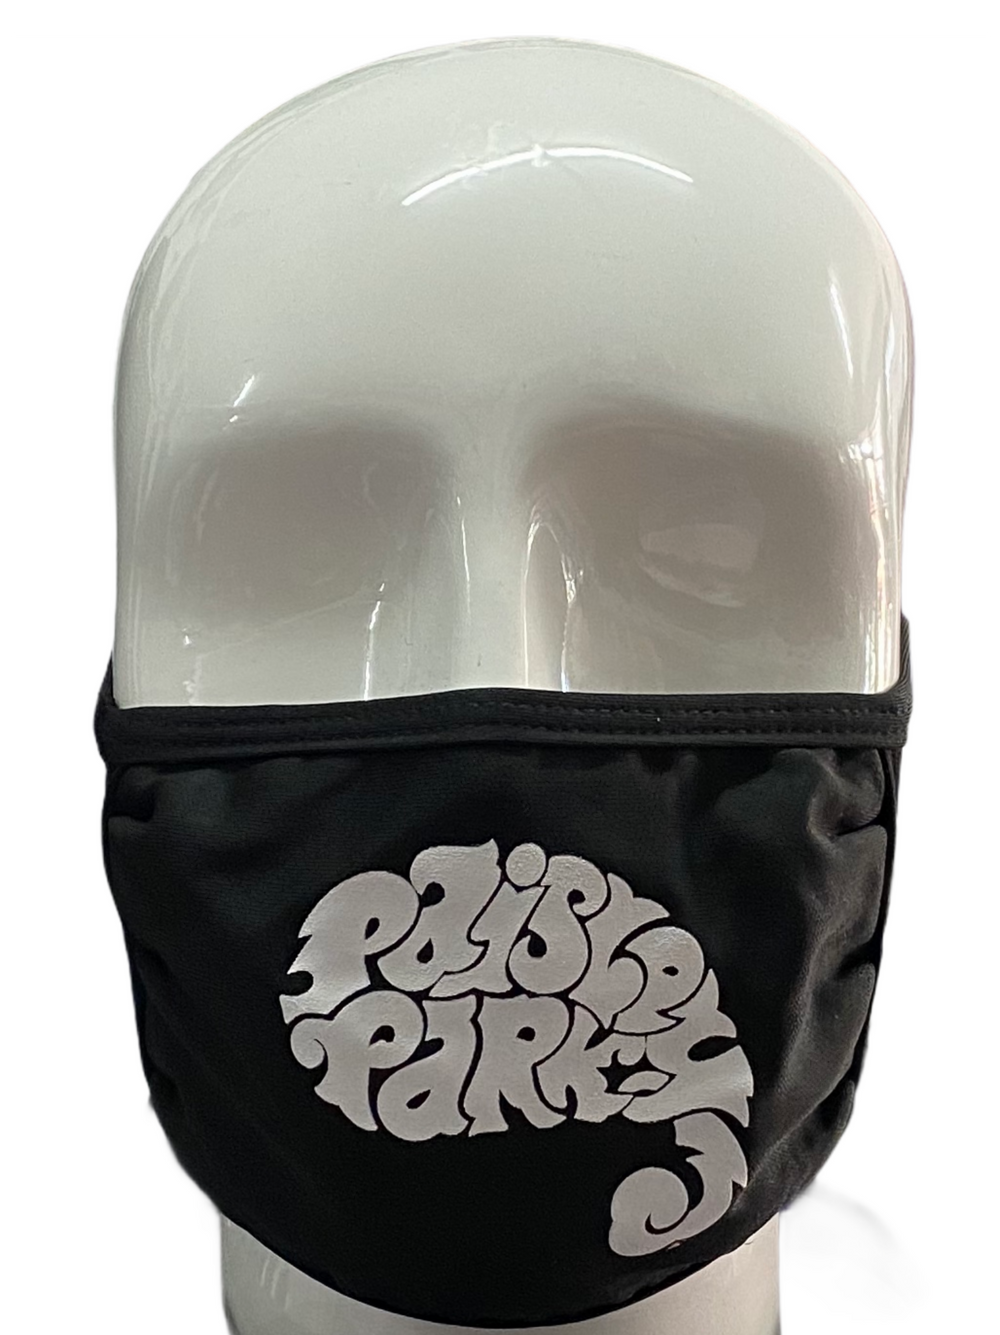 Prince – Paisley Park Official Merchandise Face Mask NEW